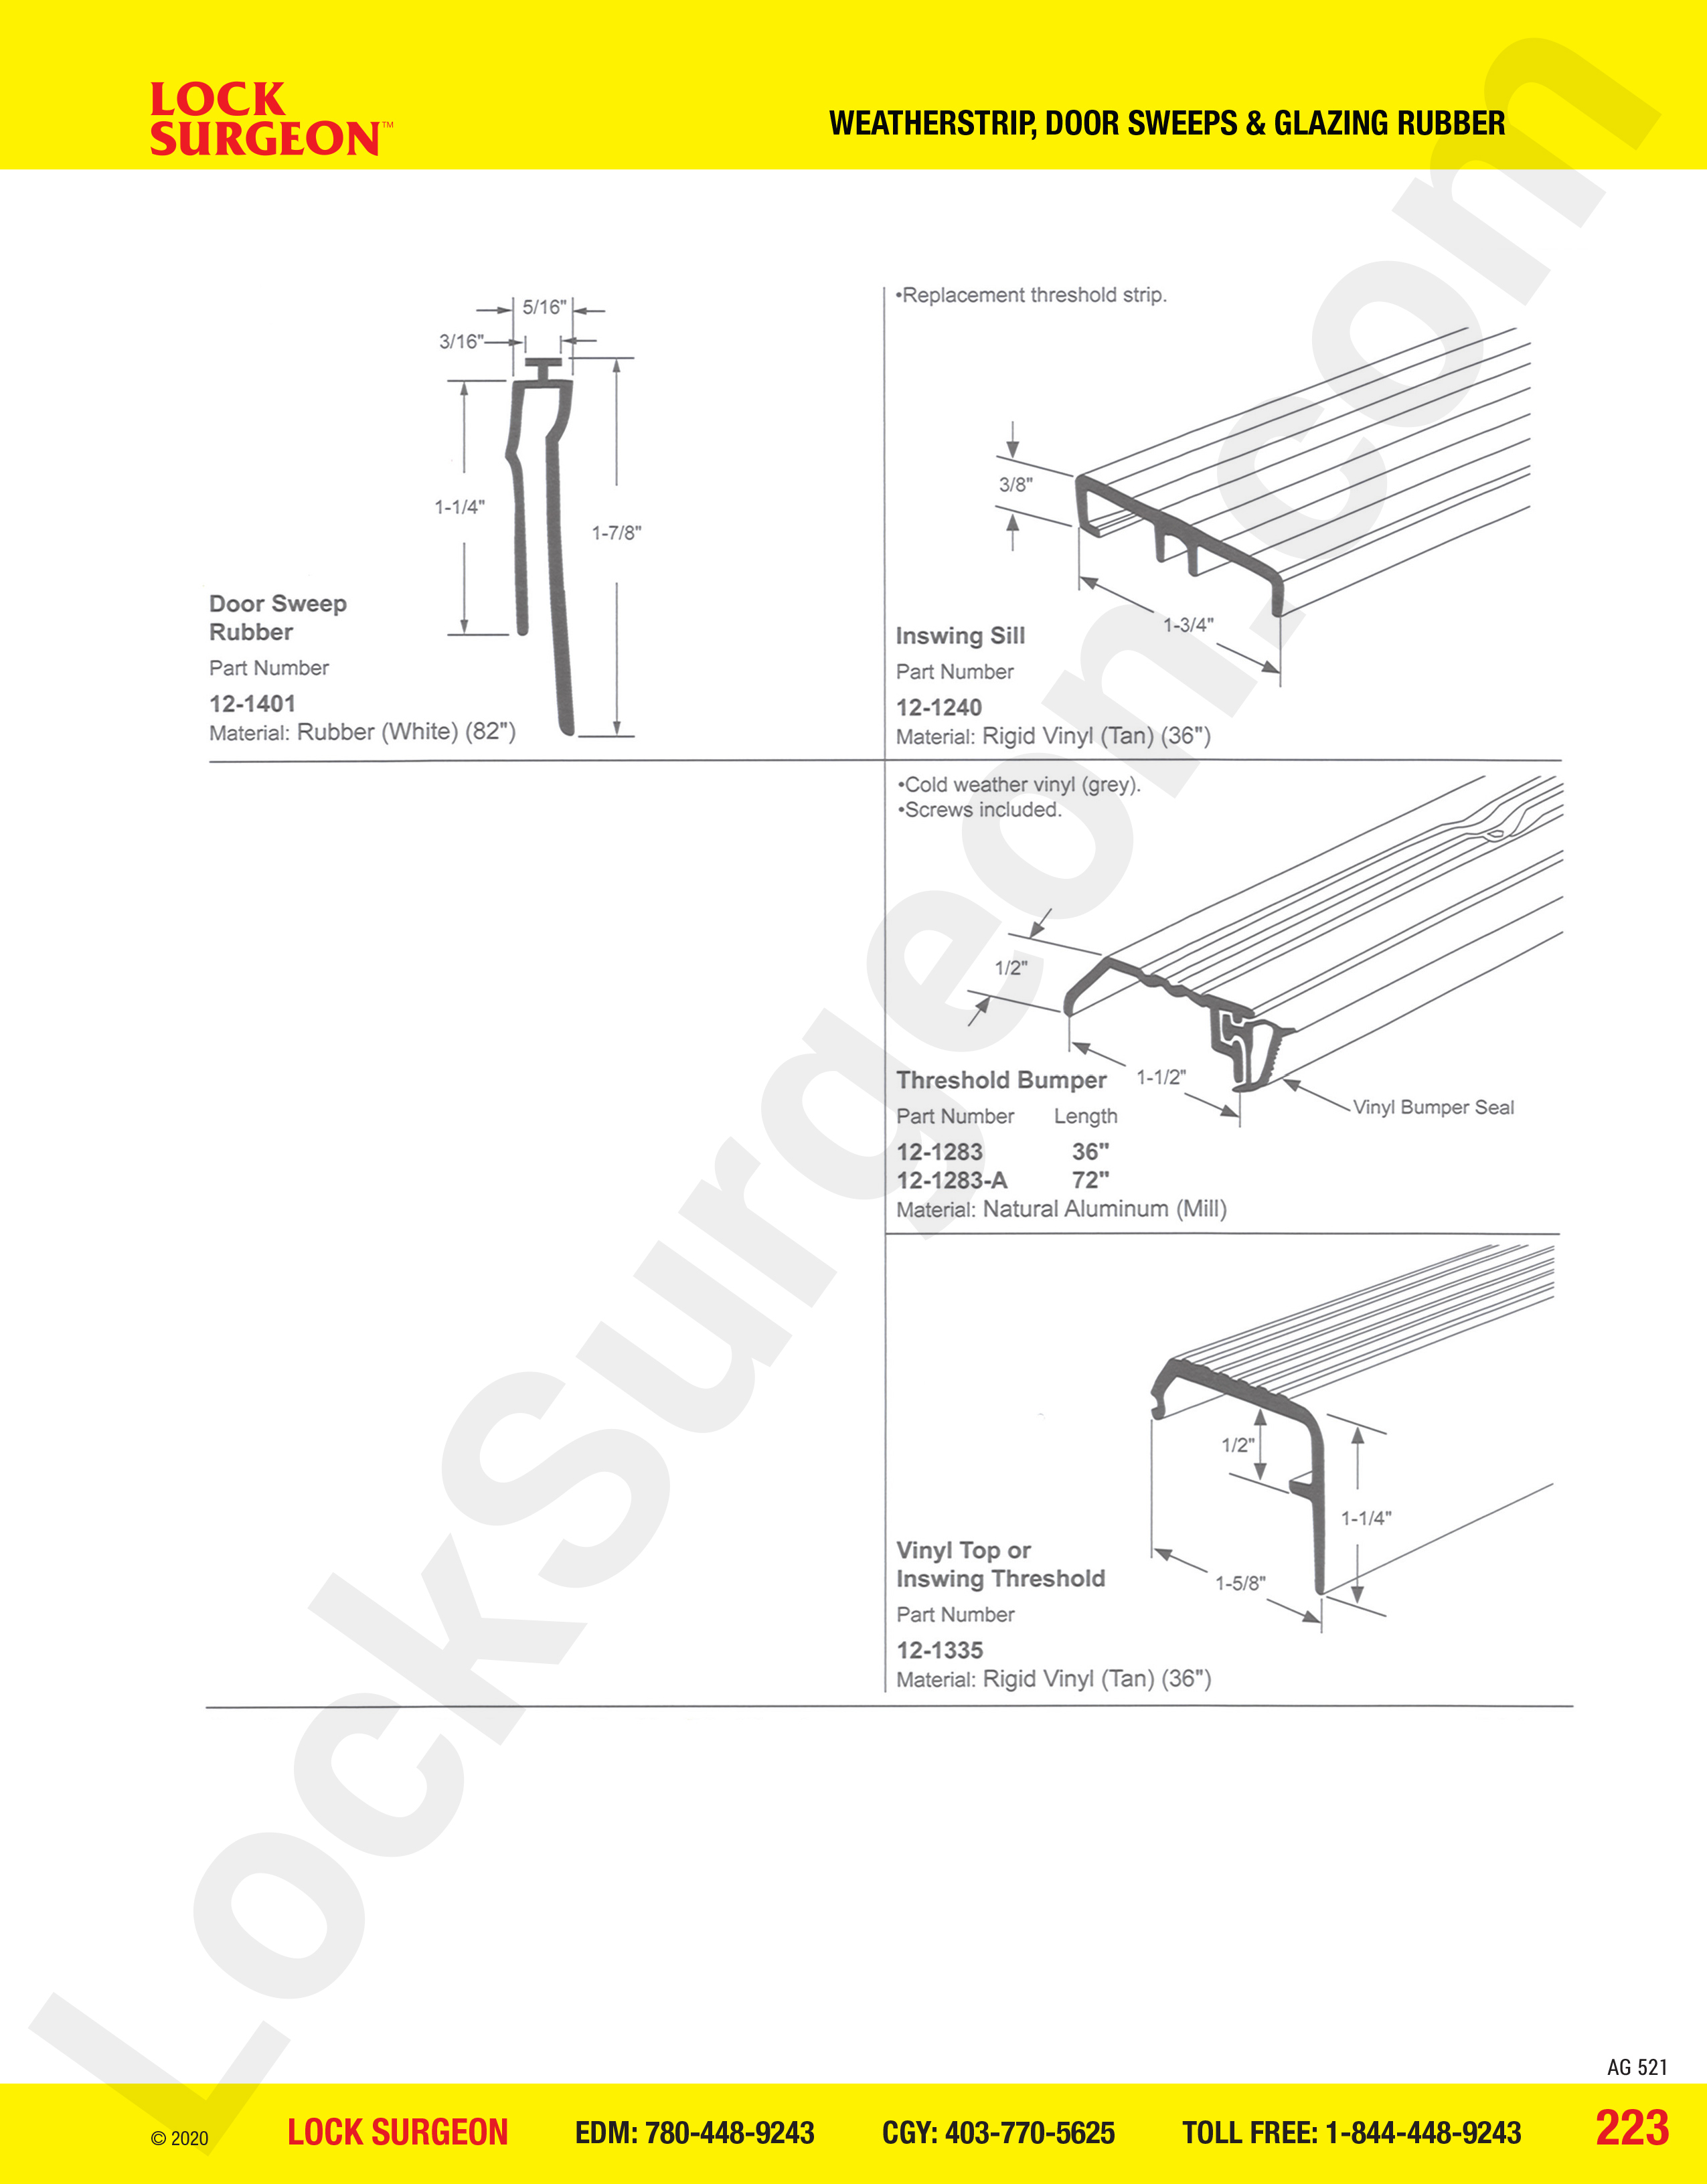 weathersrip door sweeps and glazing rubber sill, bumper, threshold parts